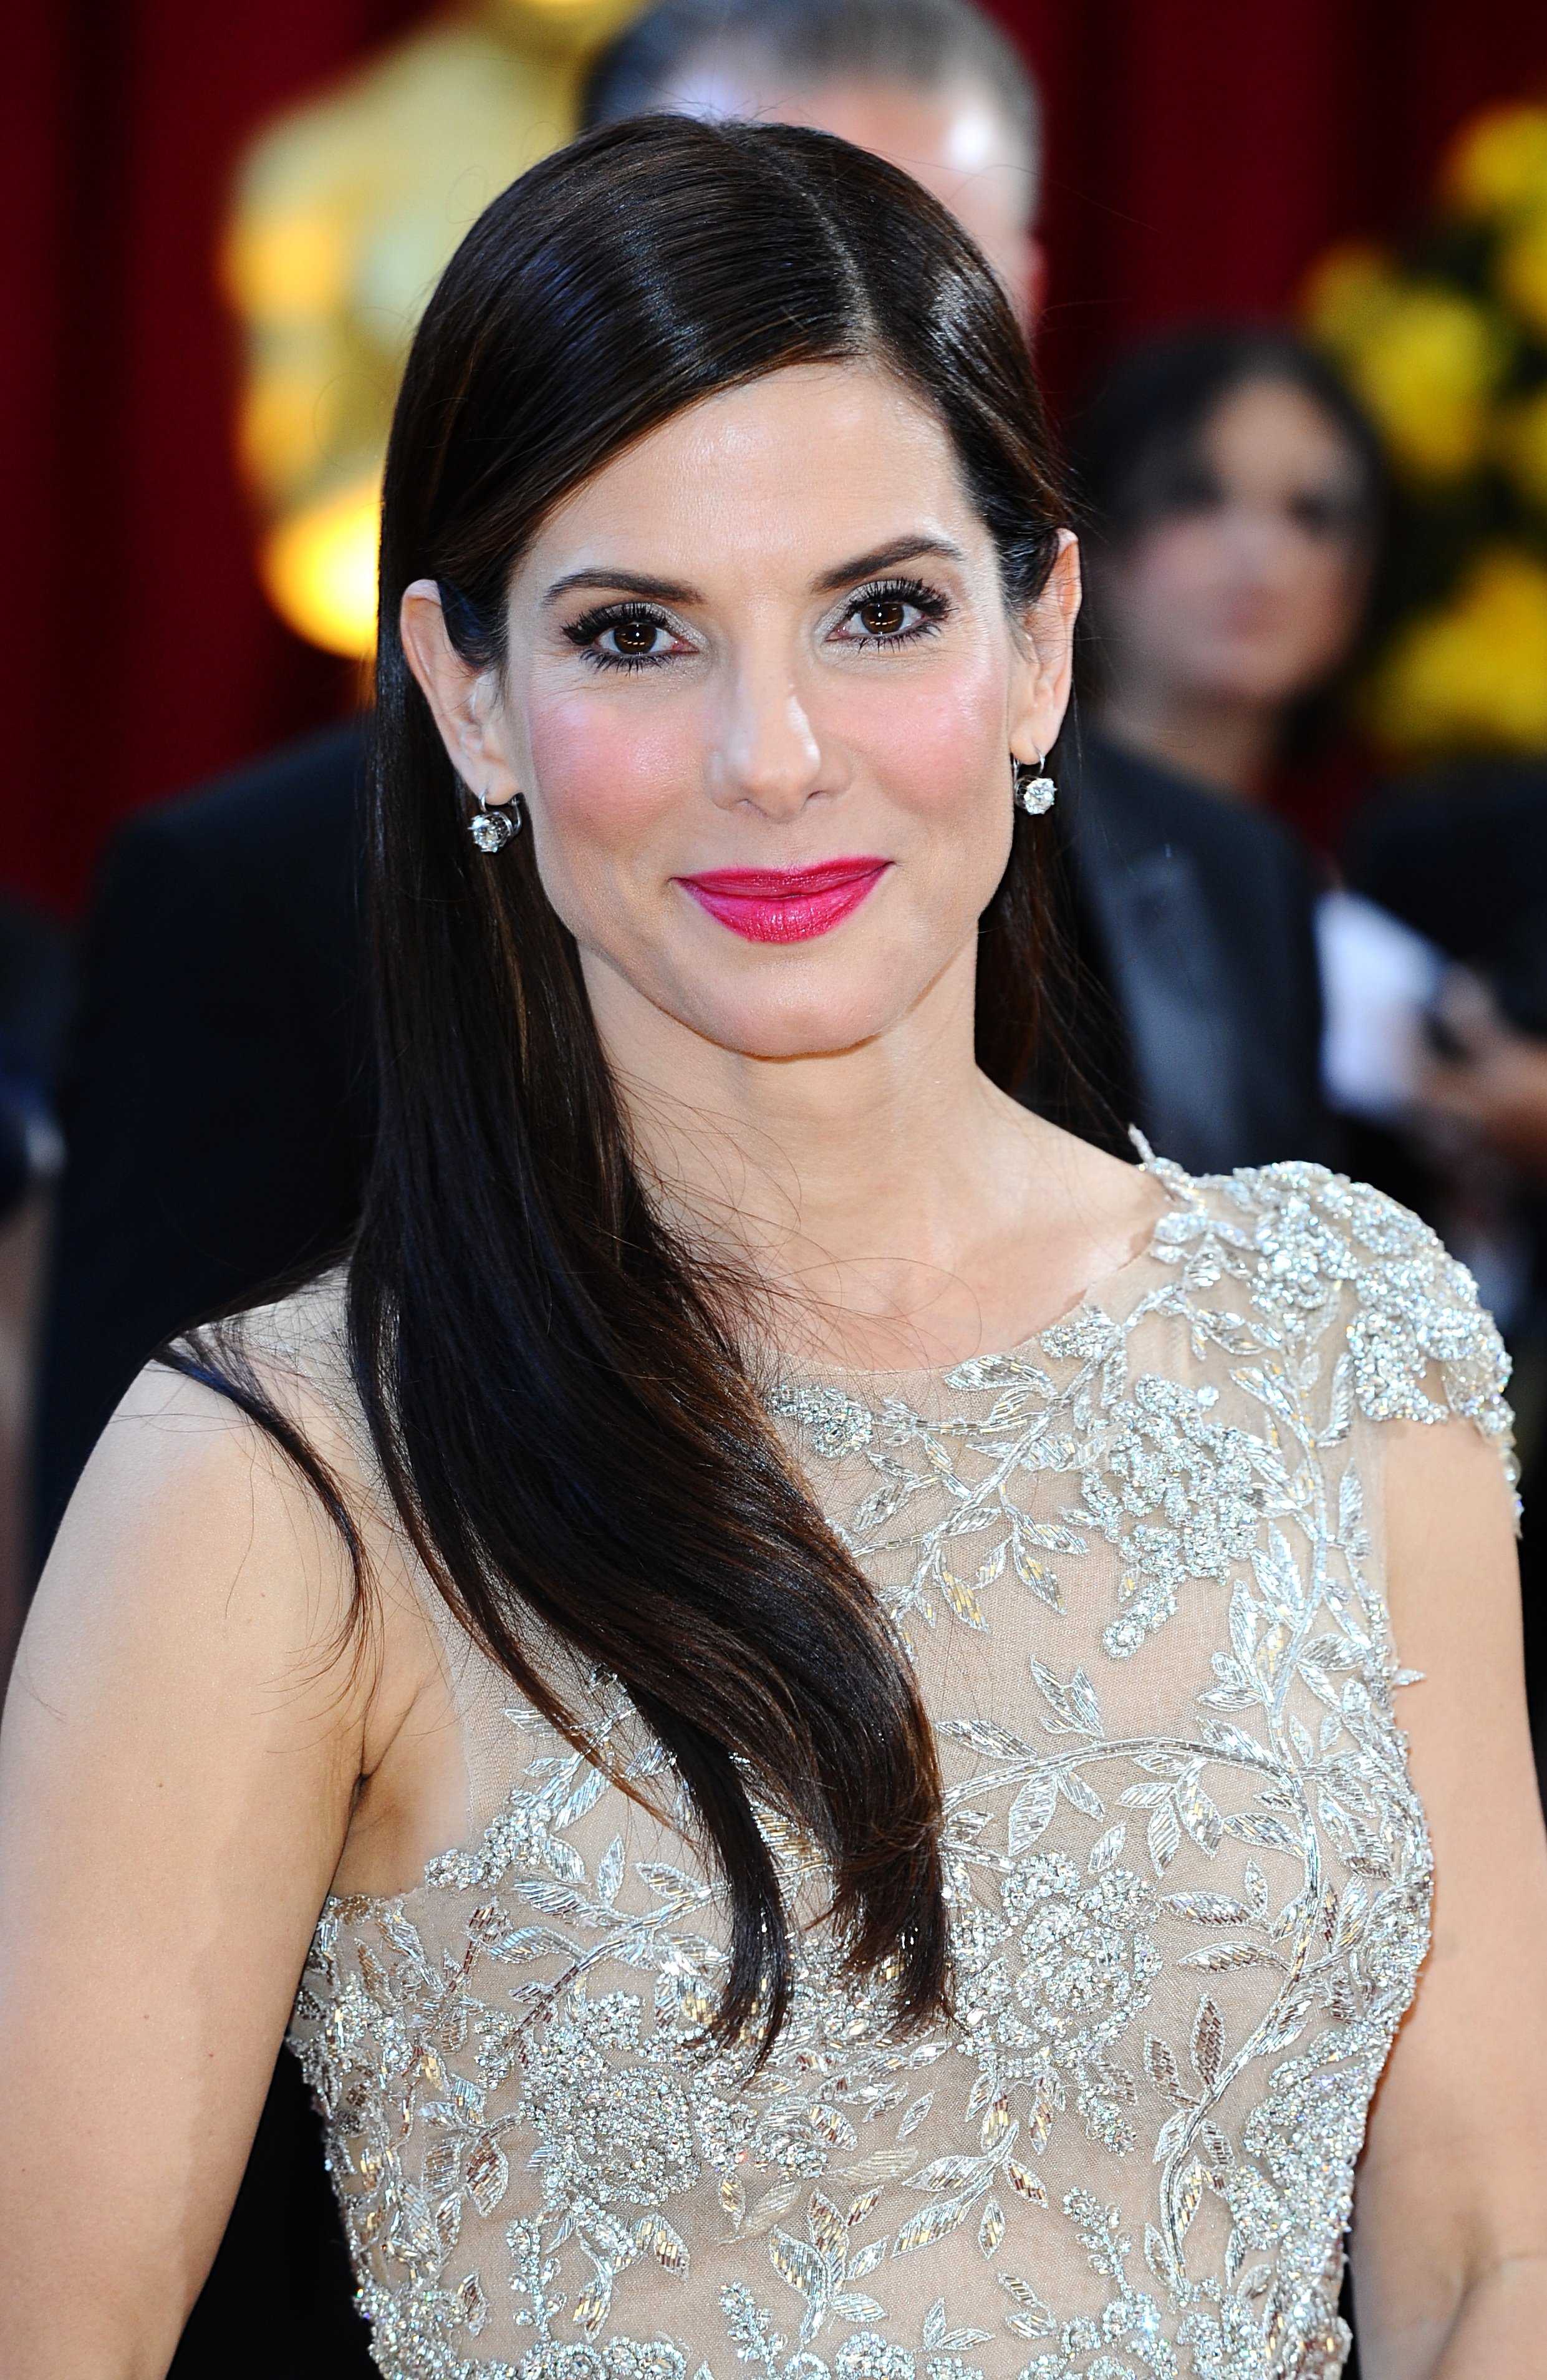 Sandra Bullock at the 82nd Academy Awards in Los Angeles, on March 7, 2010. | Source: Getty Images